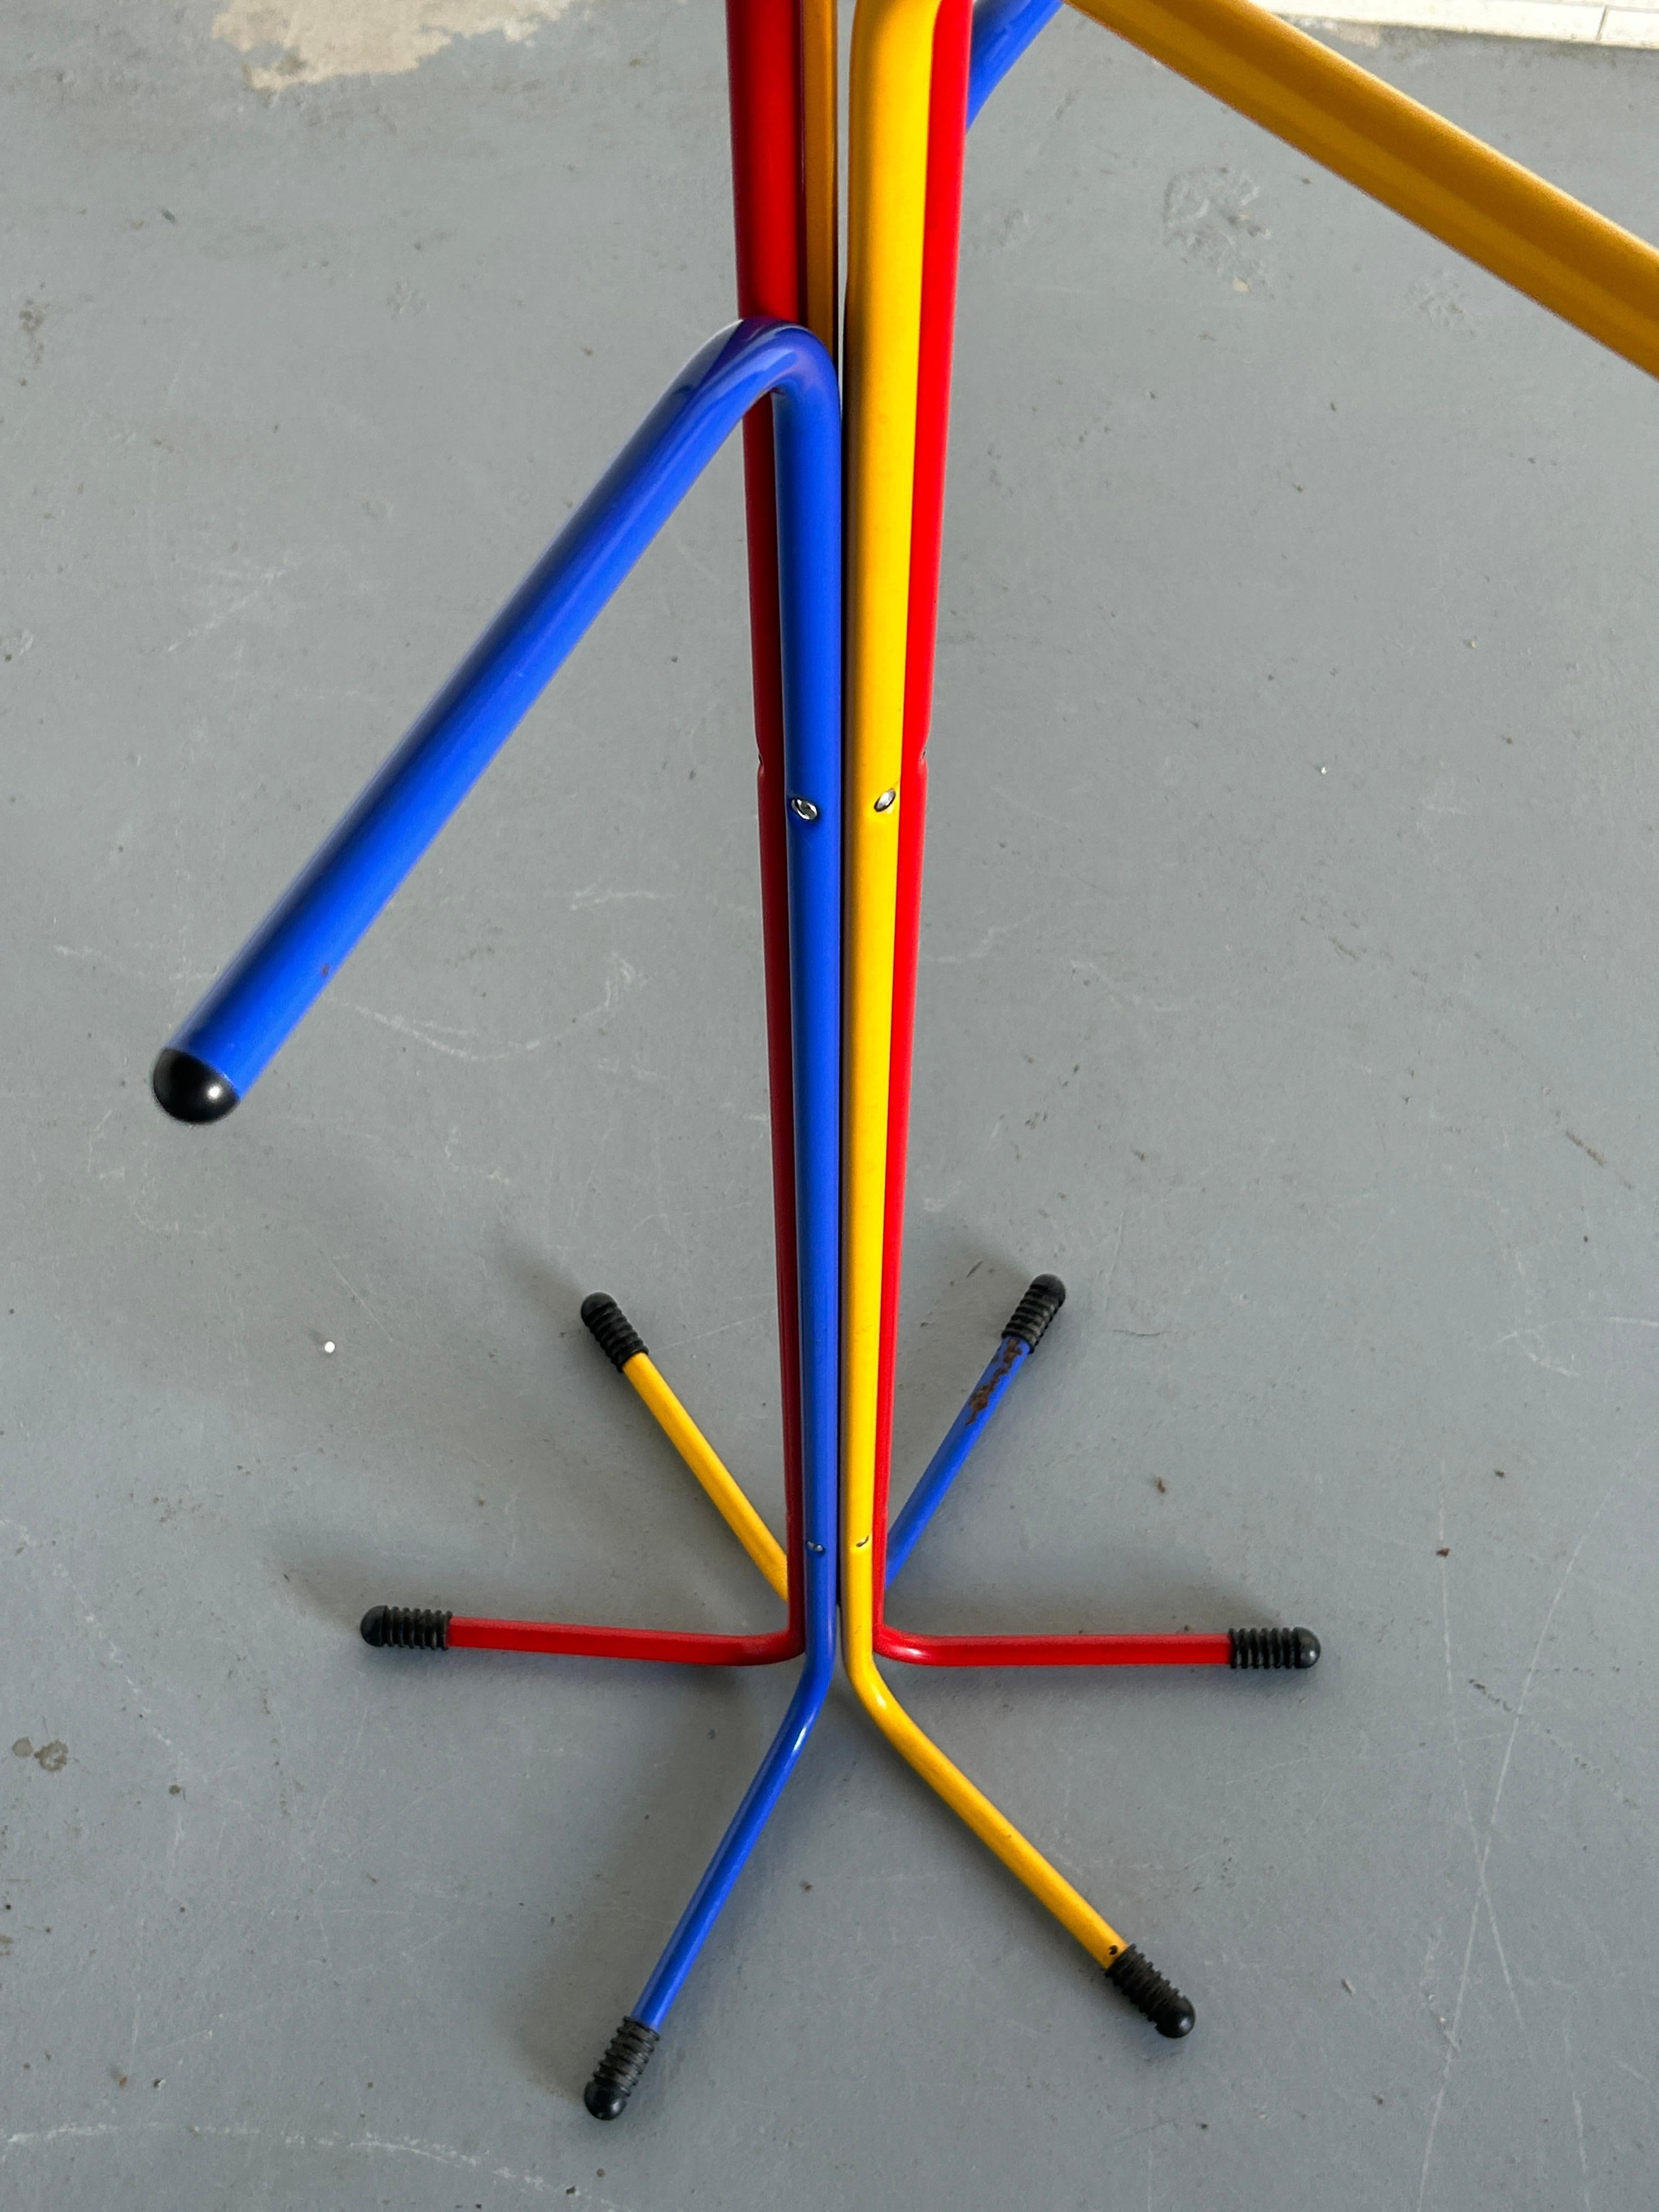 Plastic Vintage Colourful Bent Metal RIGG Coat Stand by Tord Bjorklund for Ikea, 1987